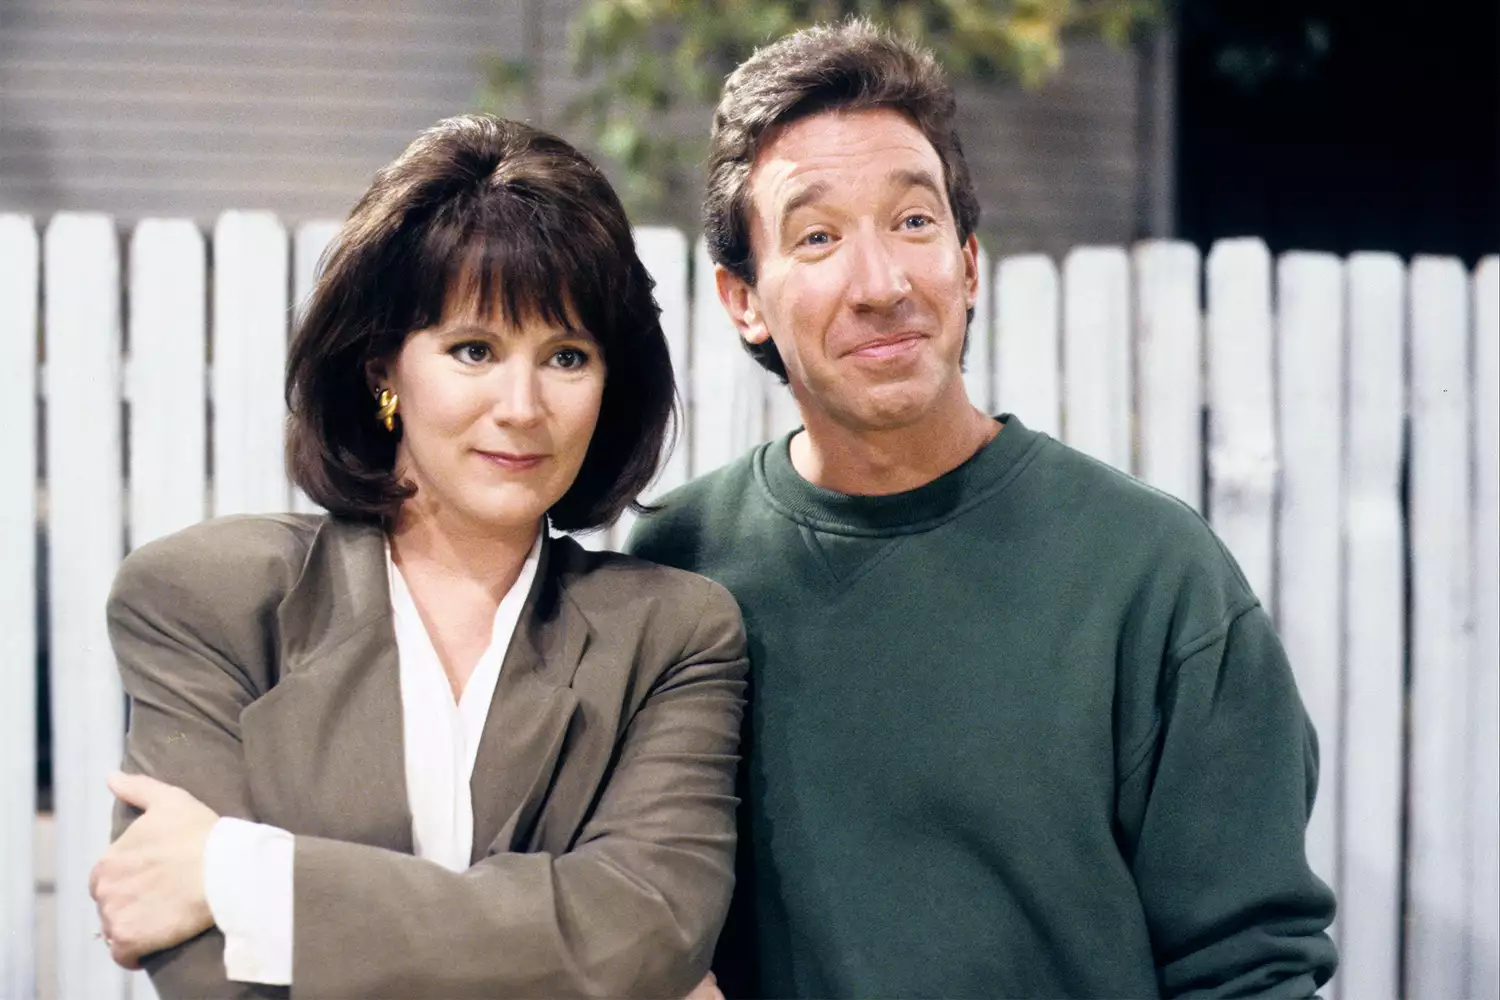 PATRICIA RICHARDSON and TIM ALLEN in HOME IMPROVEMENT 